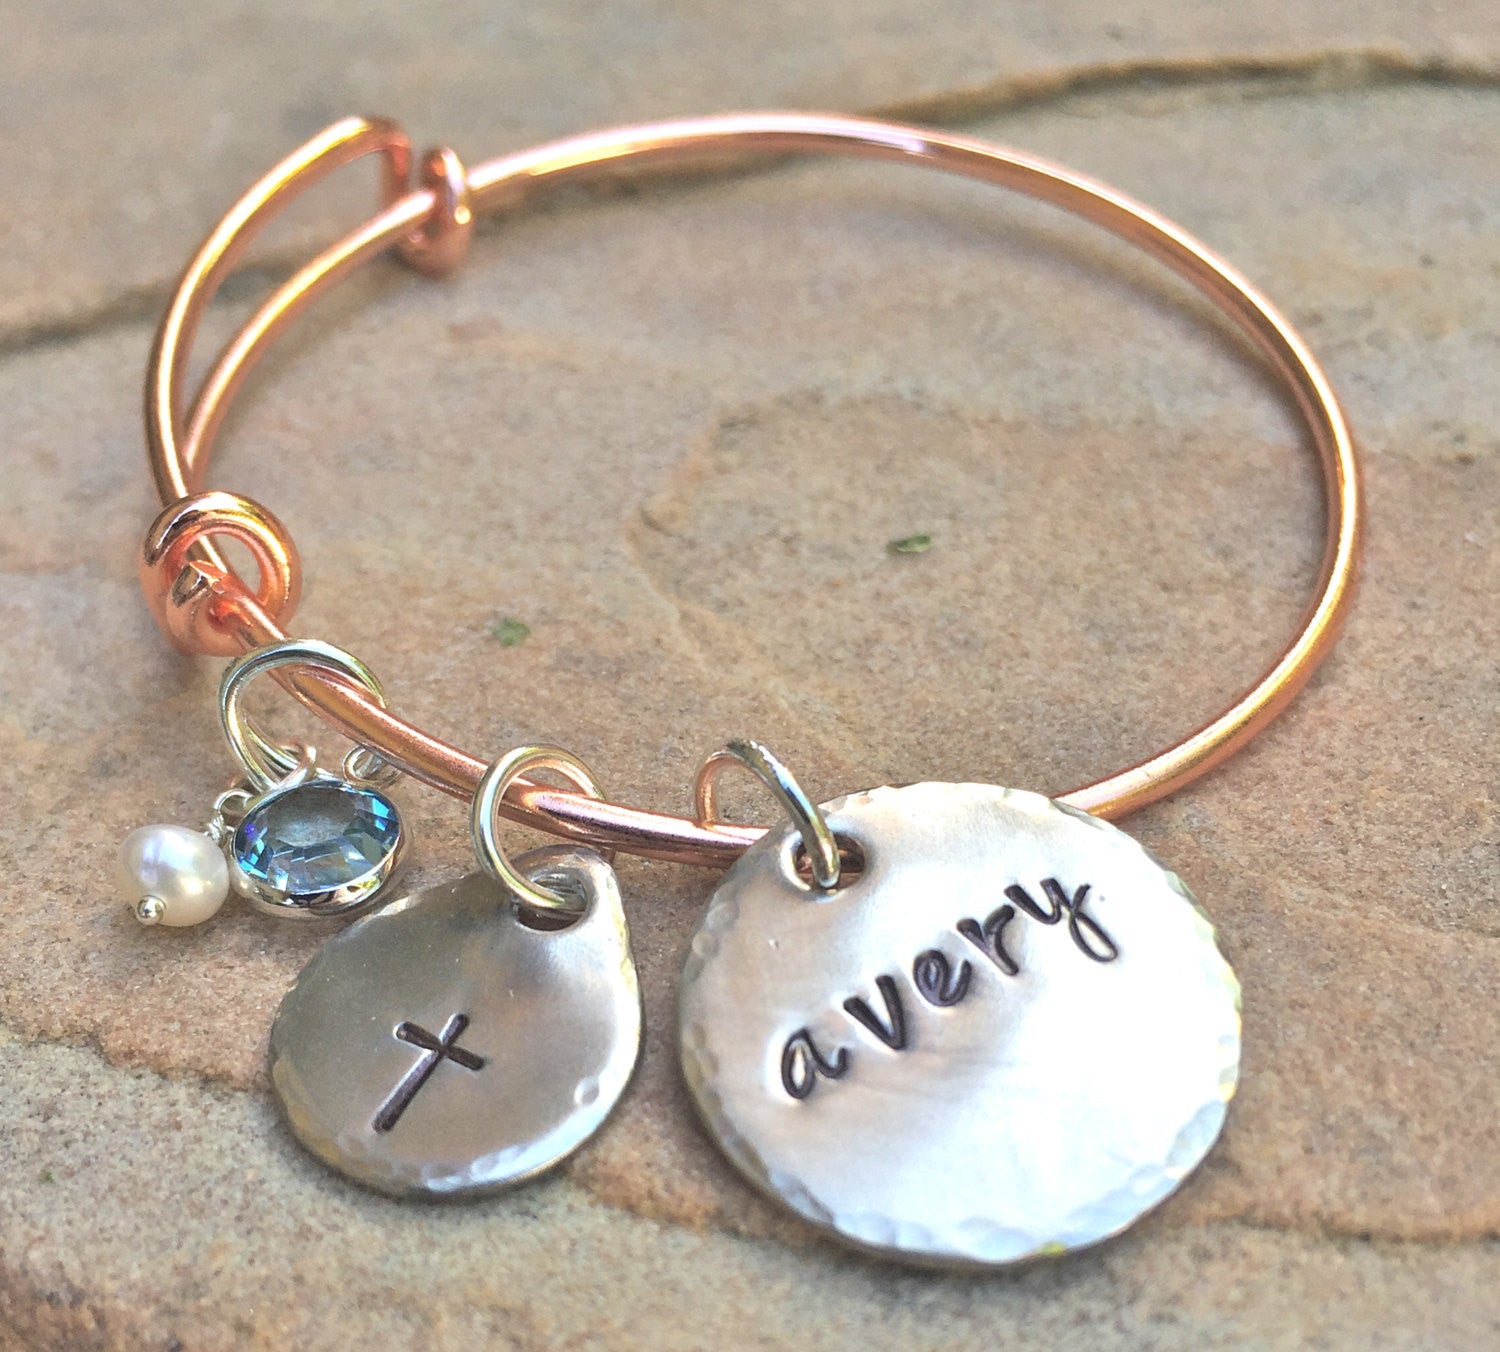 Personalized Initial Bracelet, Hand Stamped Name Charm Bracelet